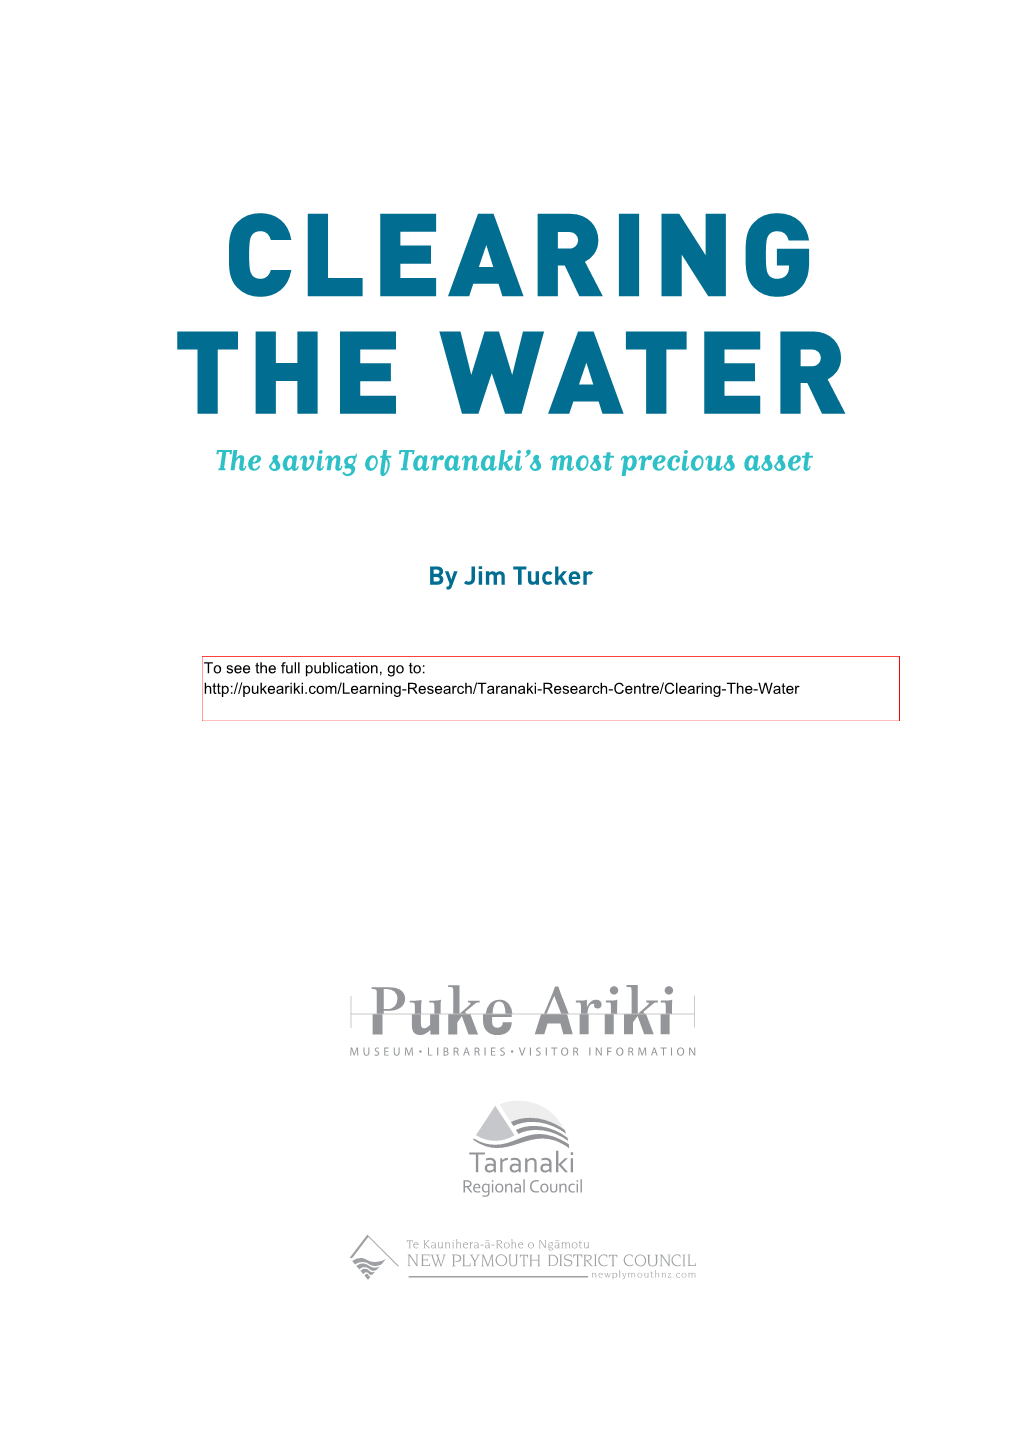 Extract from Clearing the Water